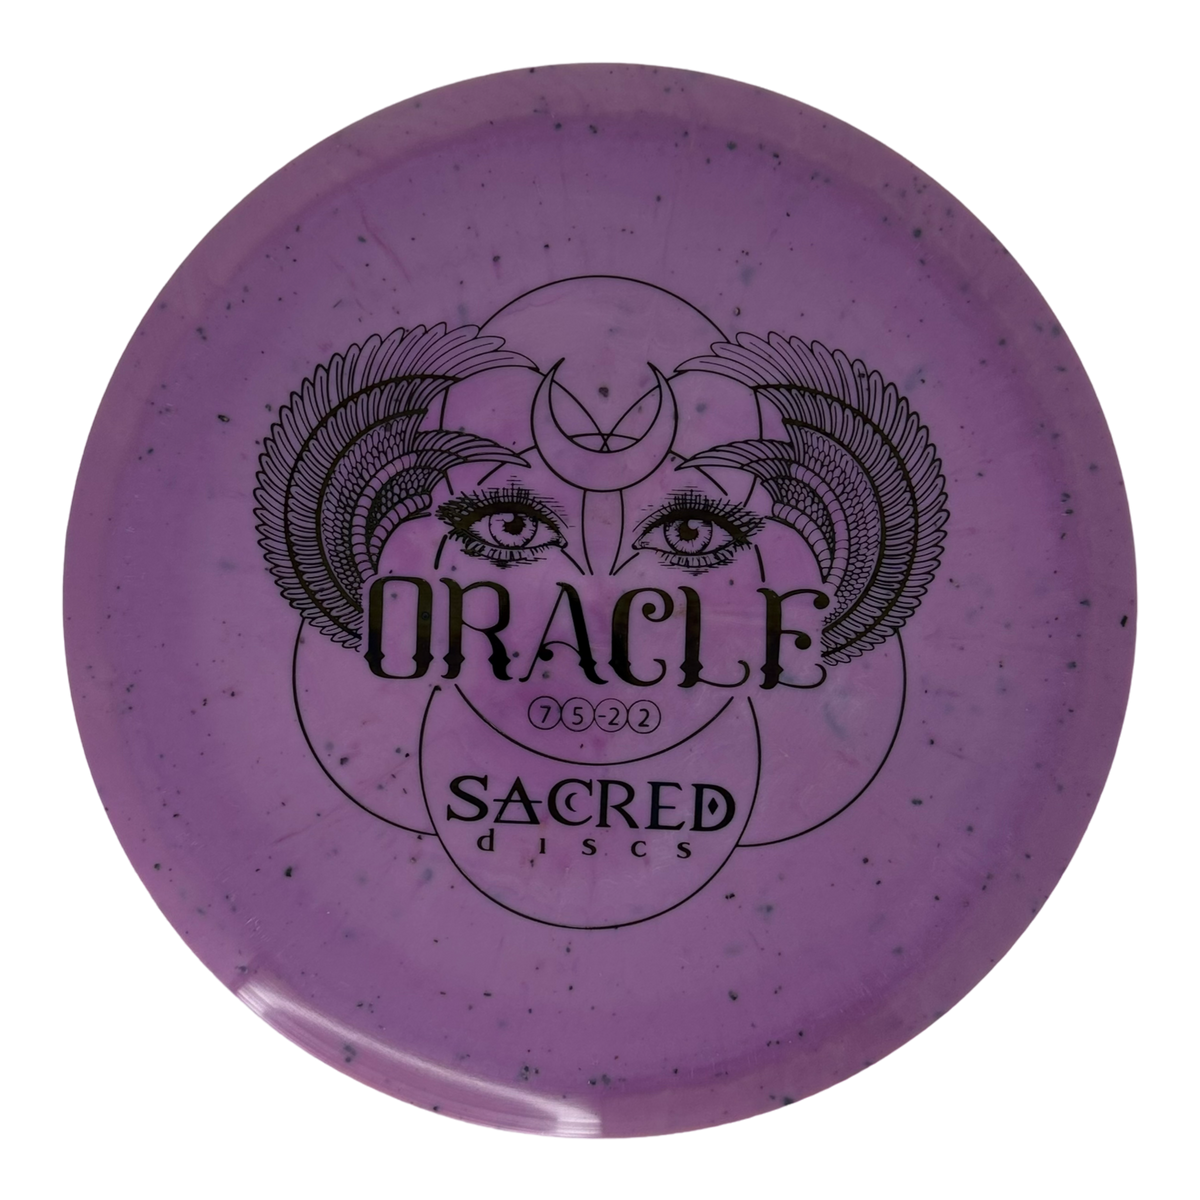 Sacred Discs Alchemy Blend Oracle - Artist Edition